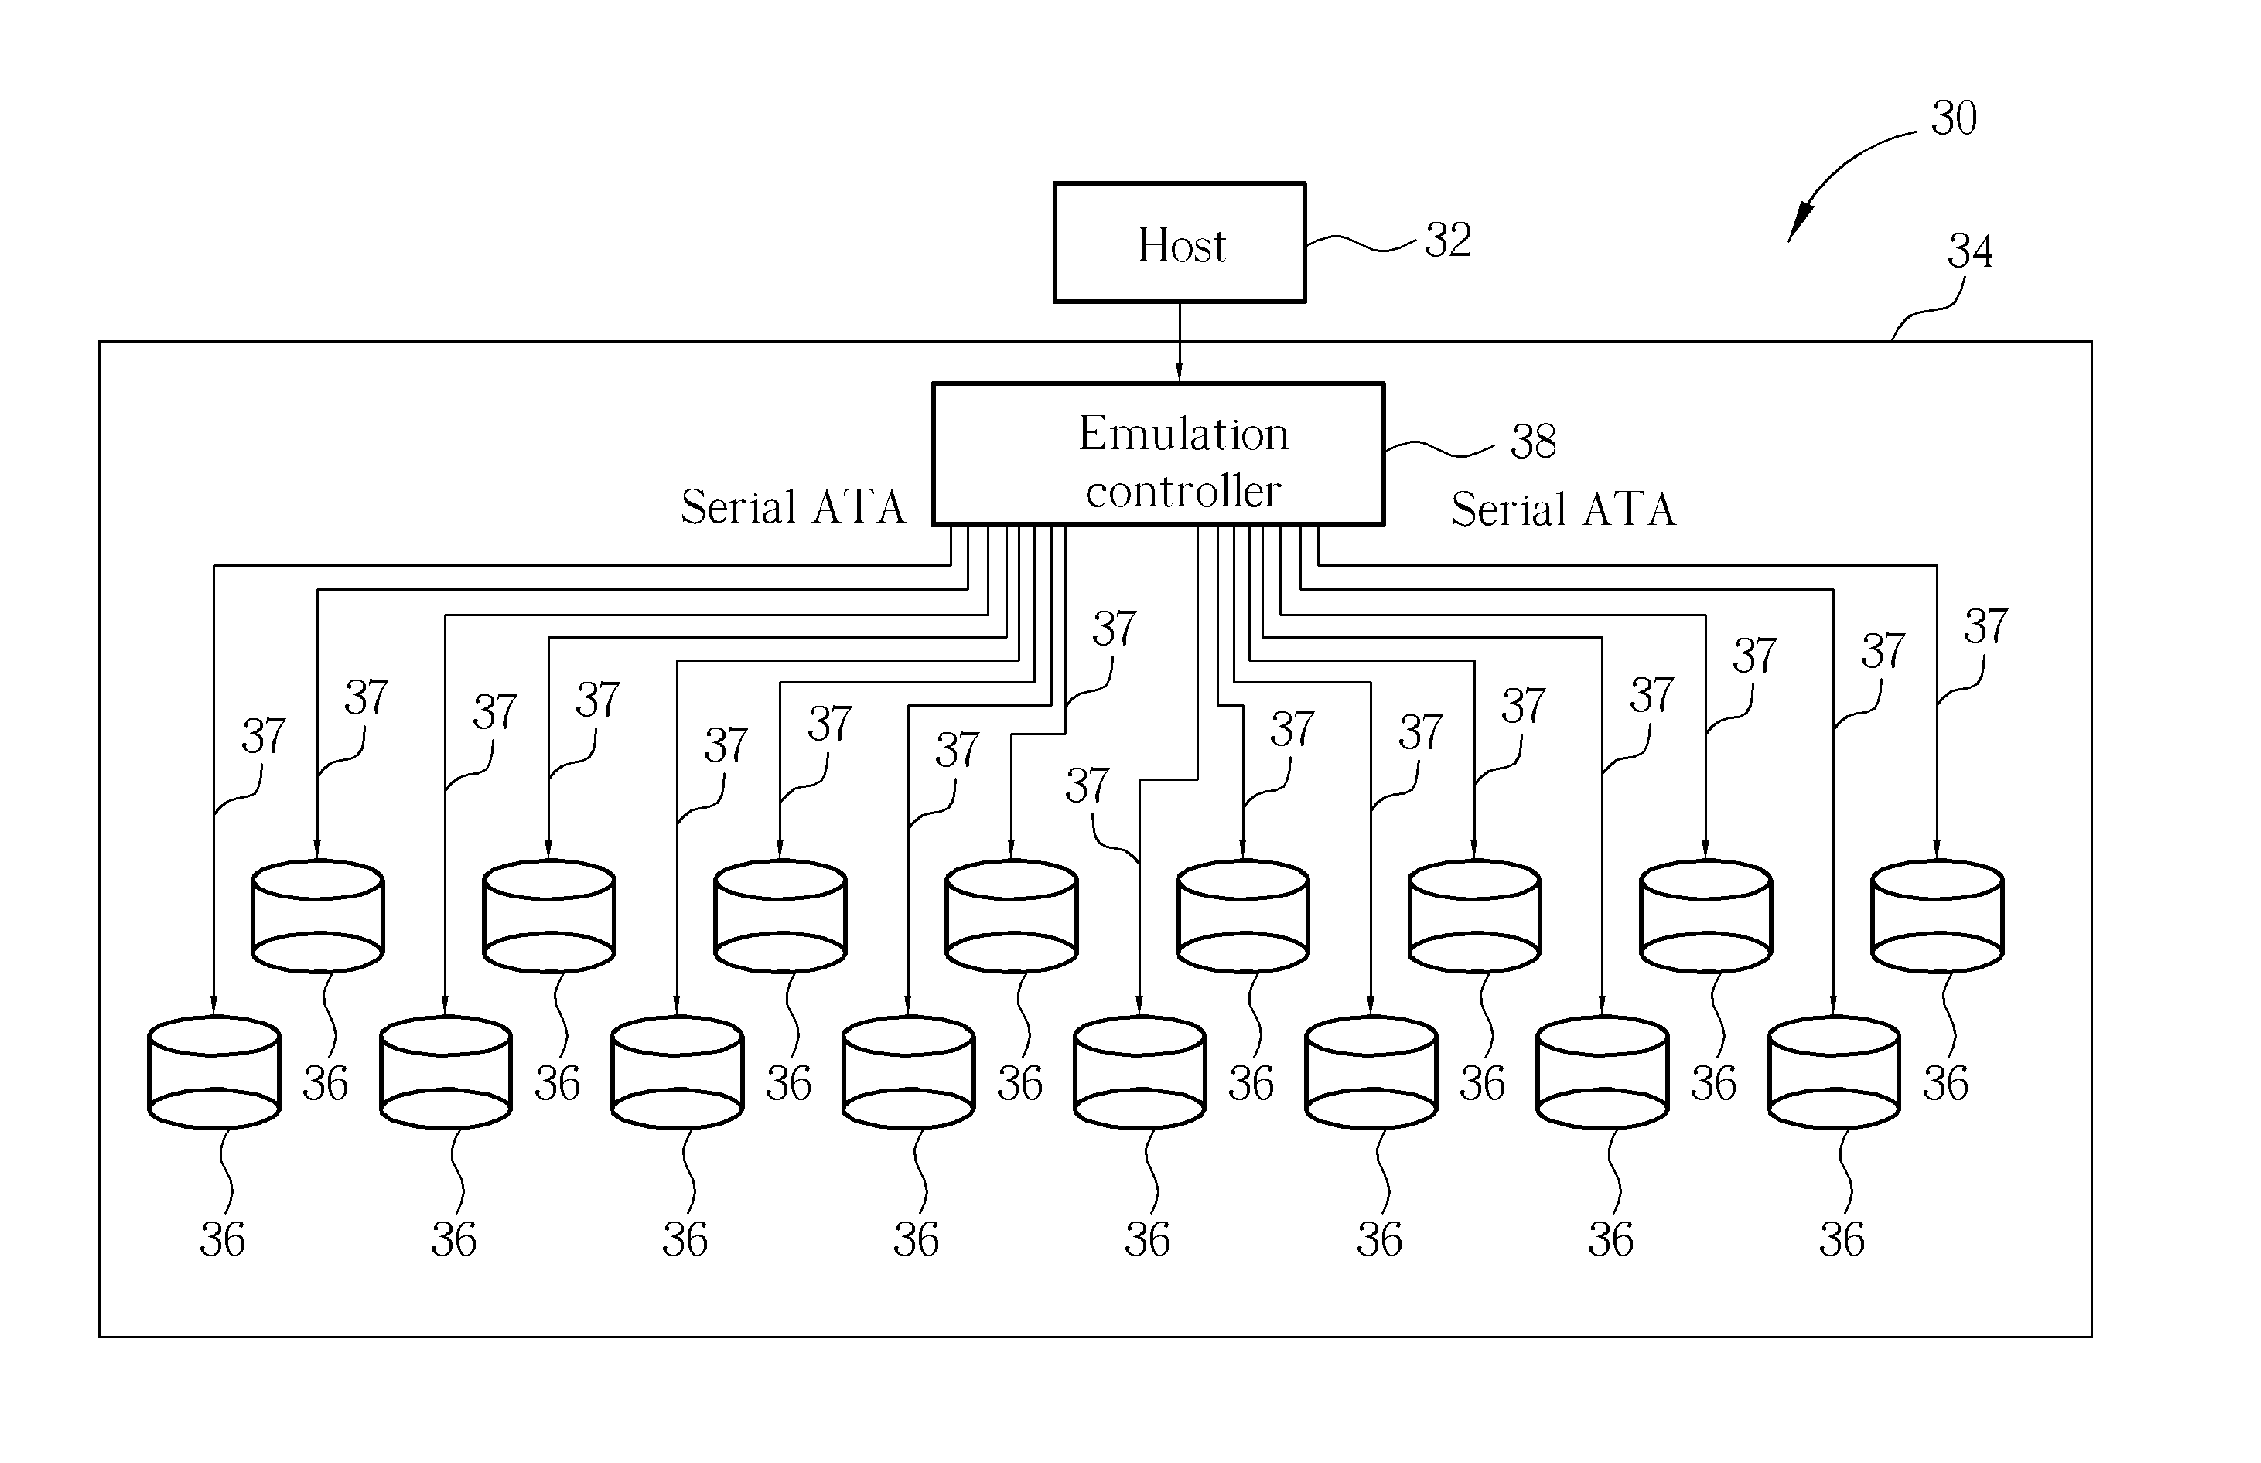 JBOD subsystem and external emulation controller thereof